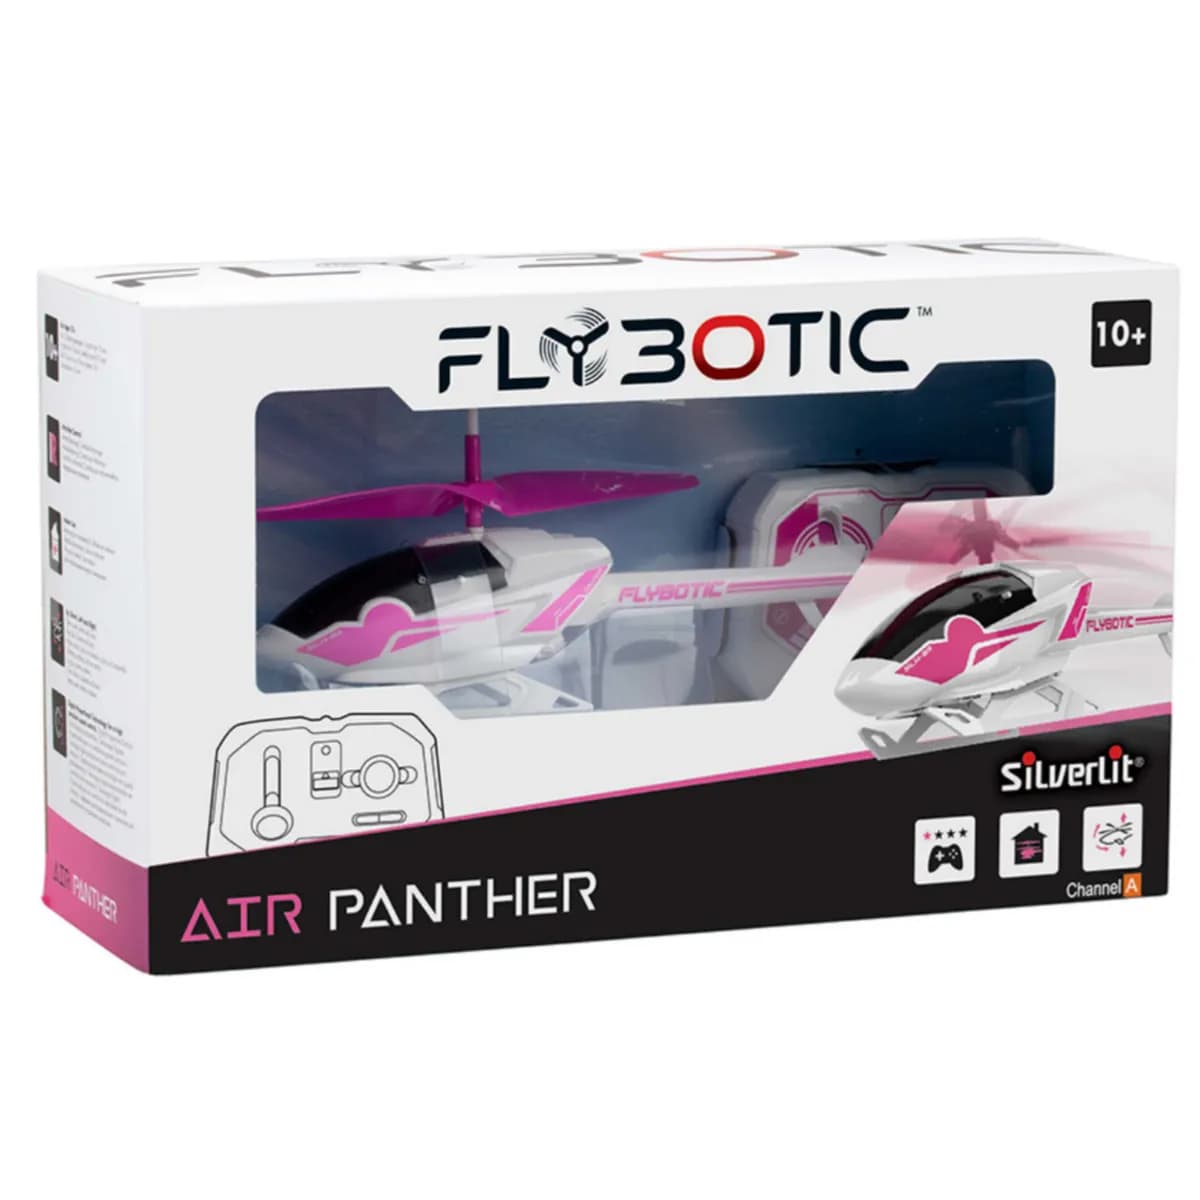 Silverlit Flybotic Air Panther Remote Control  Helicopter Toy For Kids - DEFS09